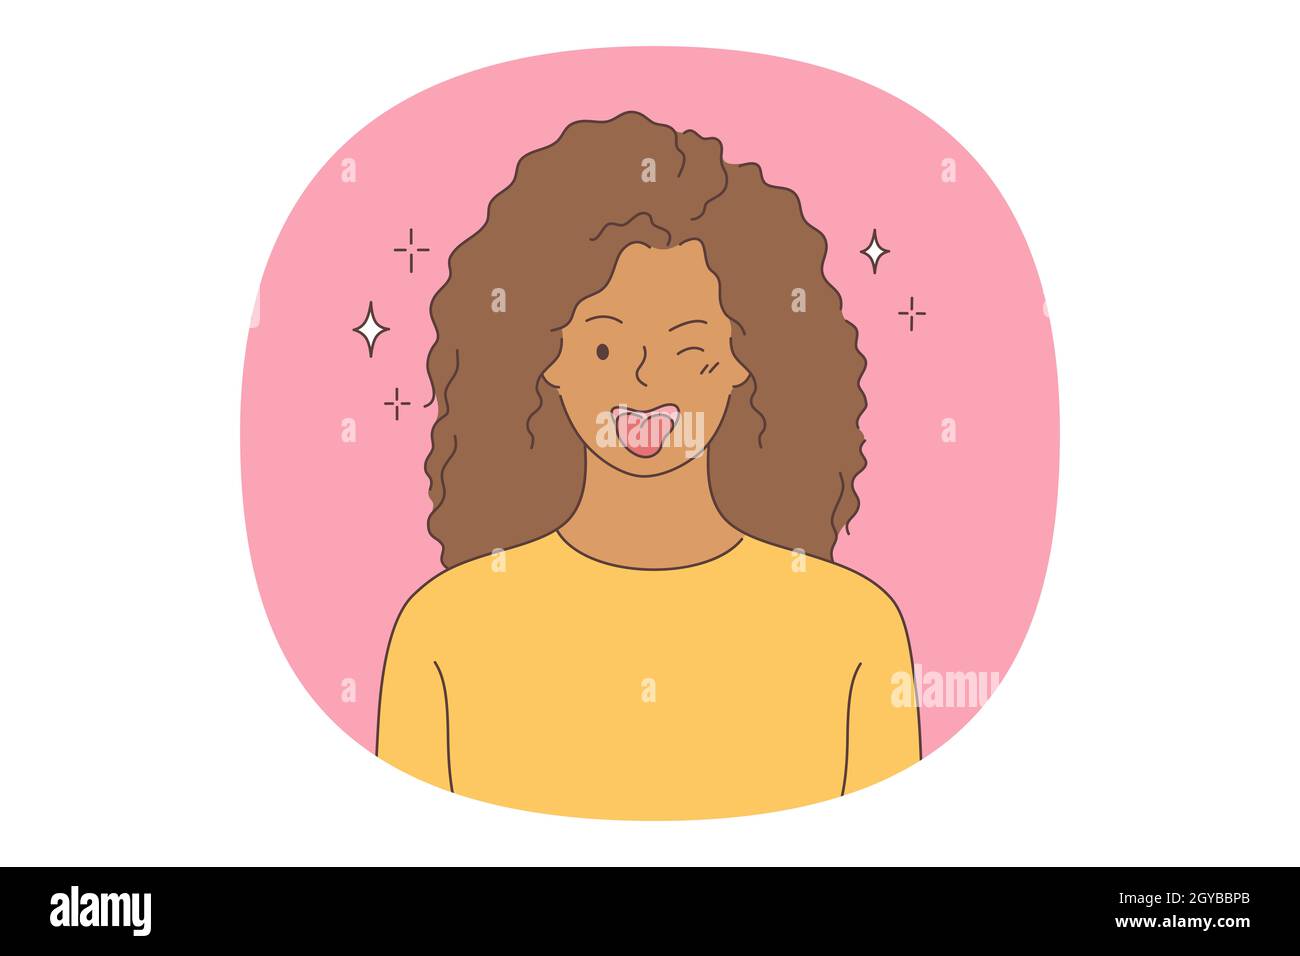 Woman expressing positive emotions concept. Young woman cartoon character showing tongue, feeling playful and happy, showing positive attitude and smi Stock Photo